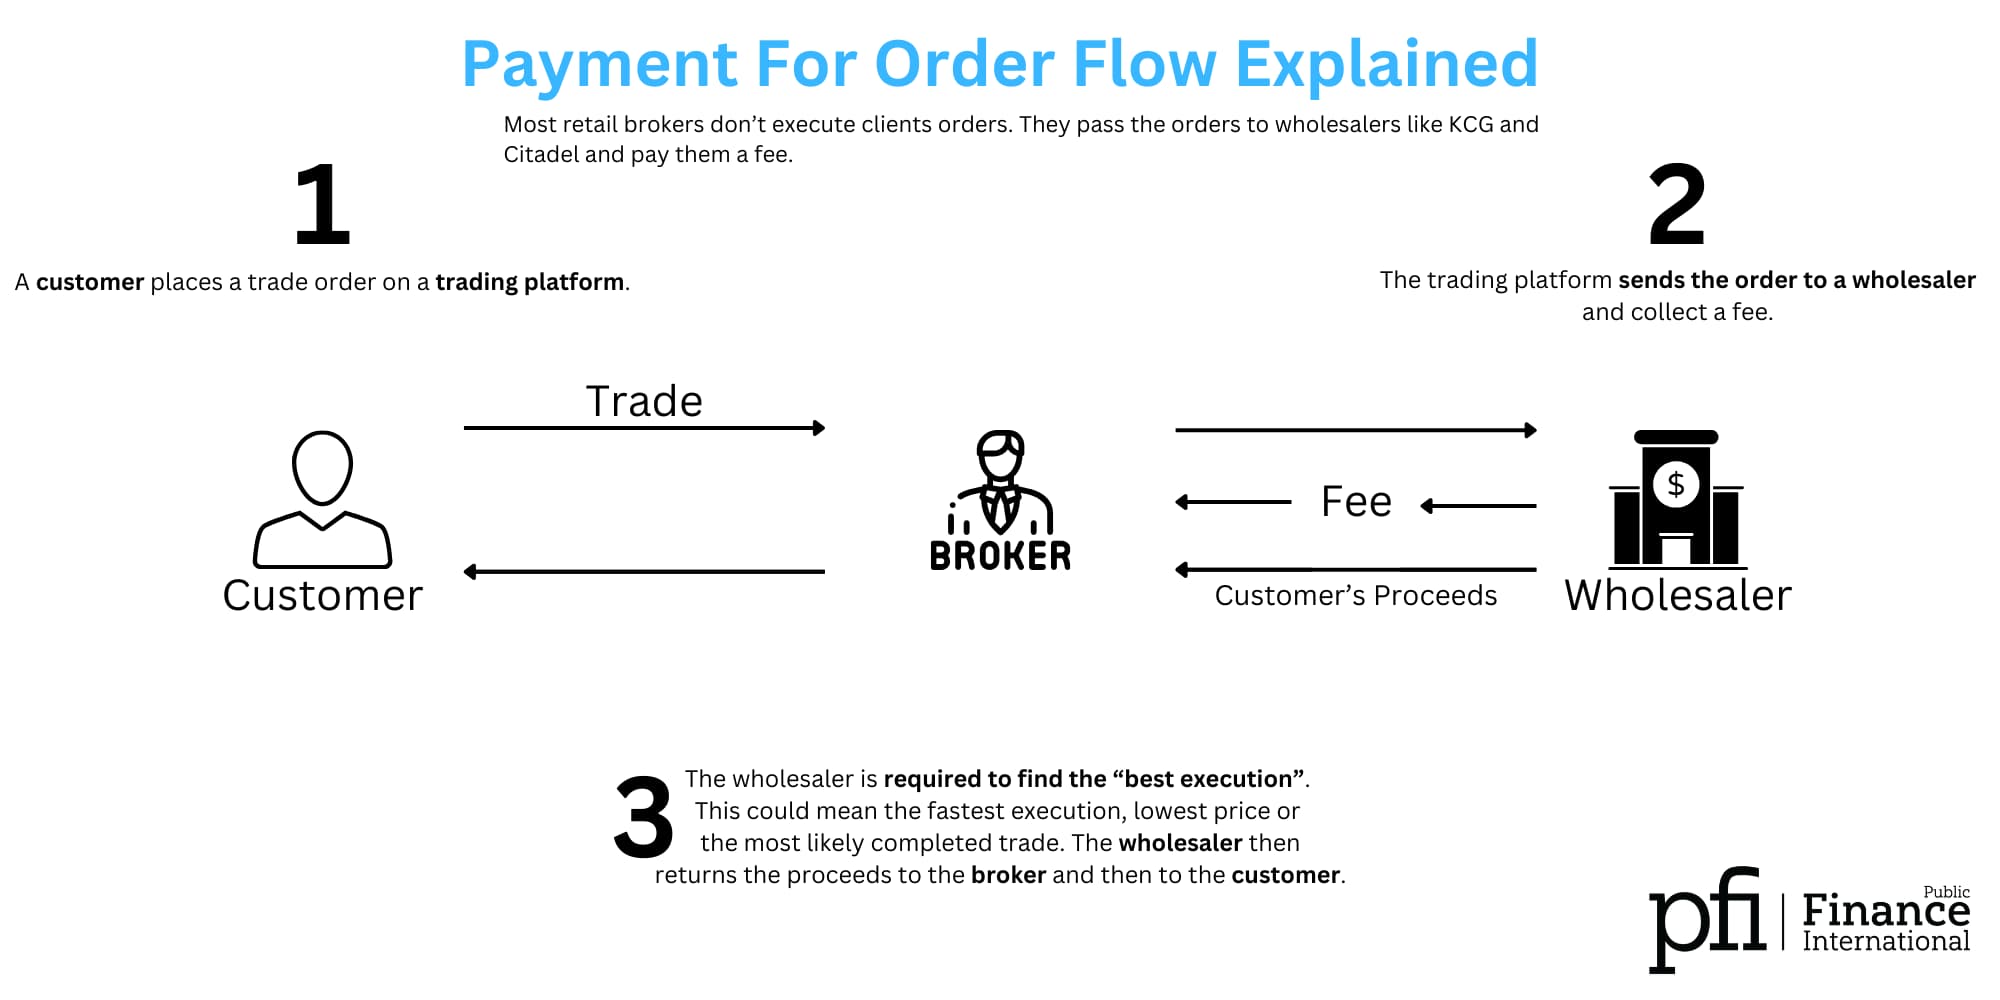 Payment For Order Flow Explained